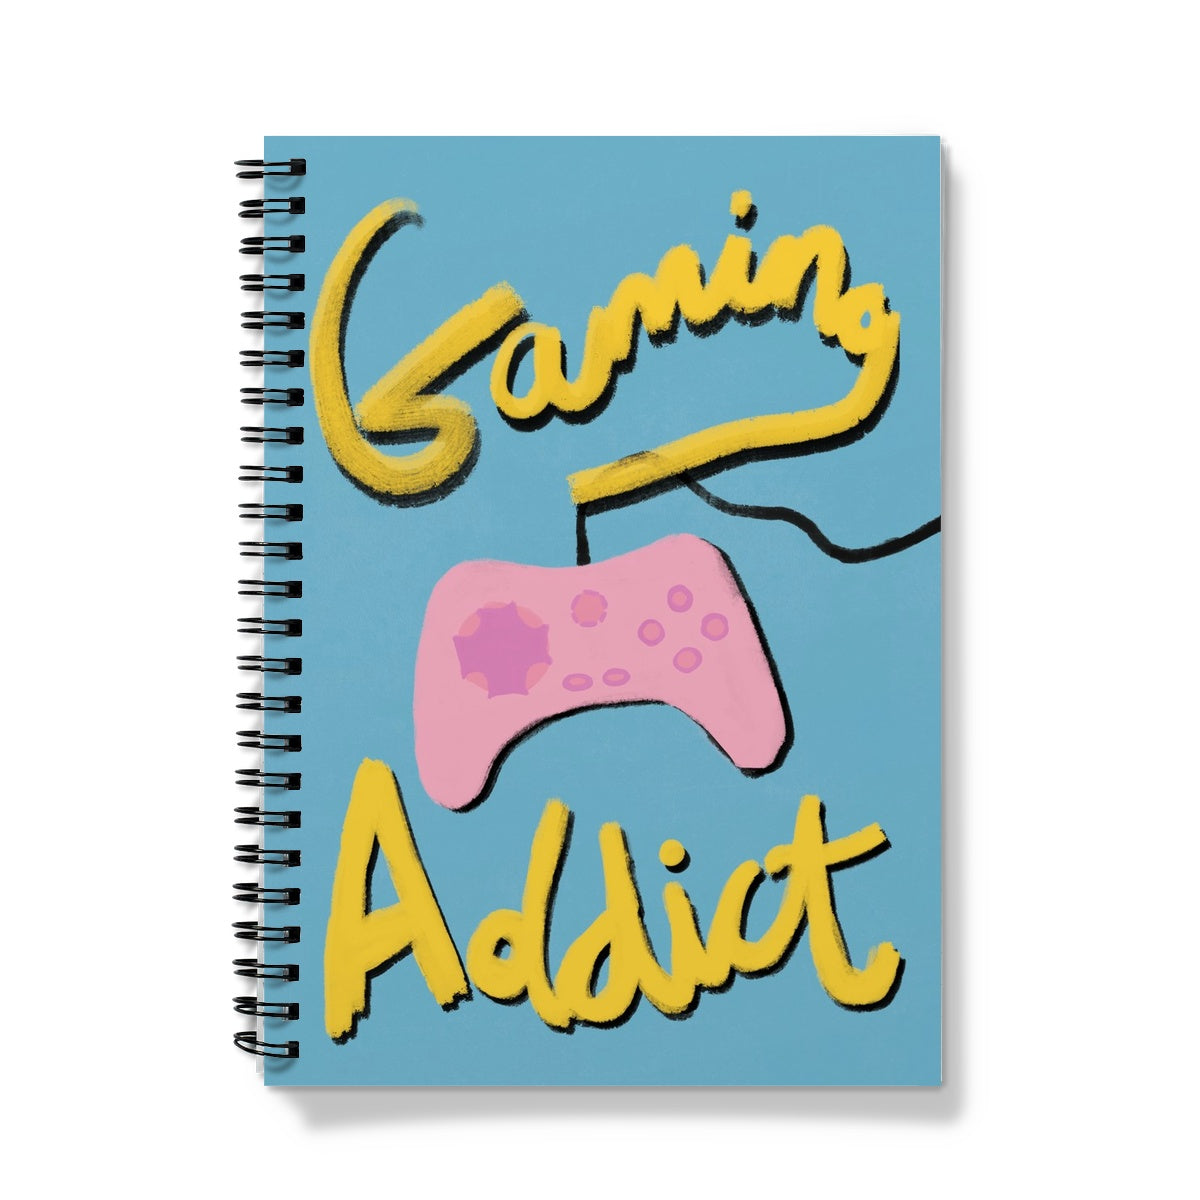 Gaming Addict Print - Blue, Yellow, Pink Notebook